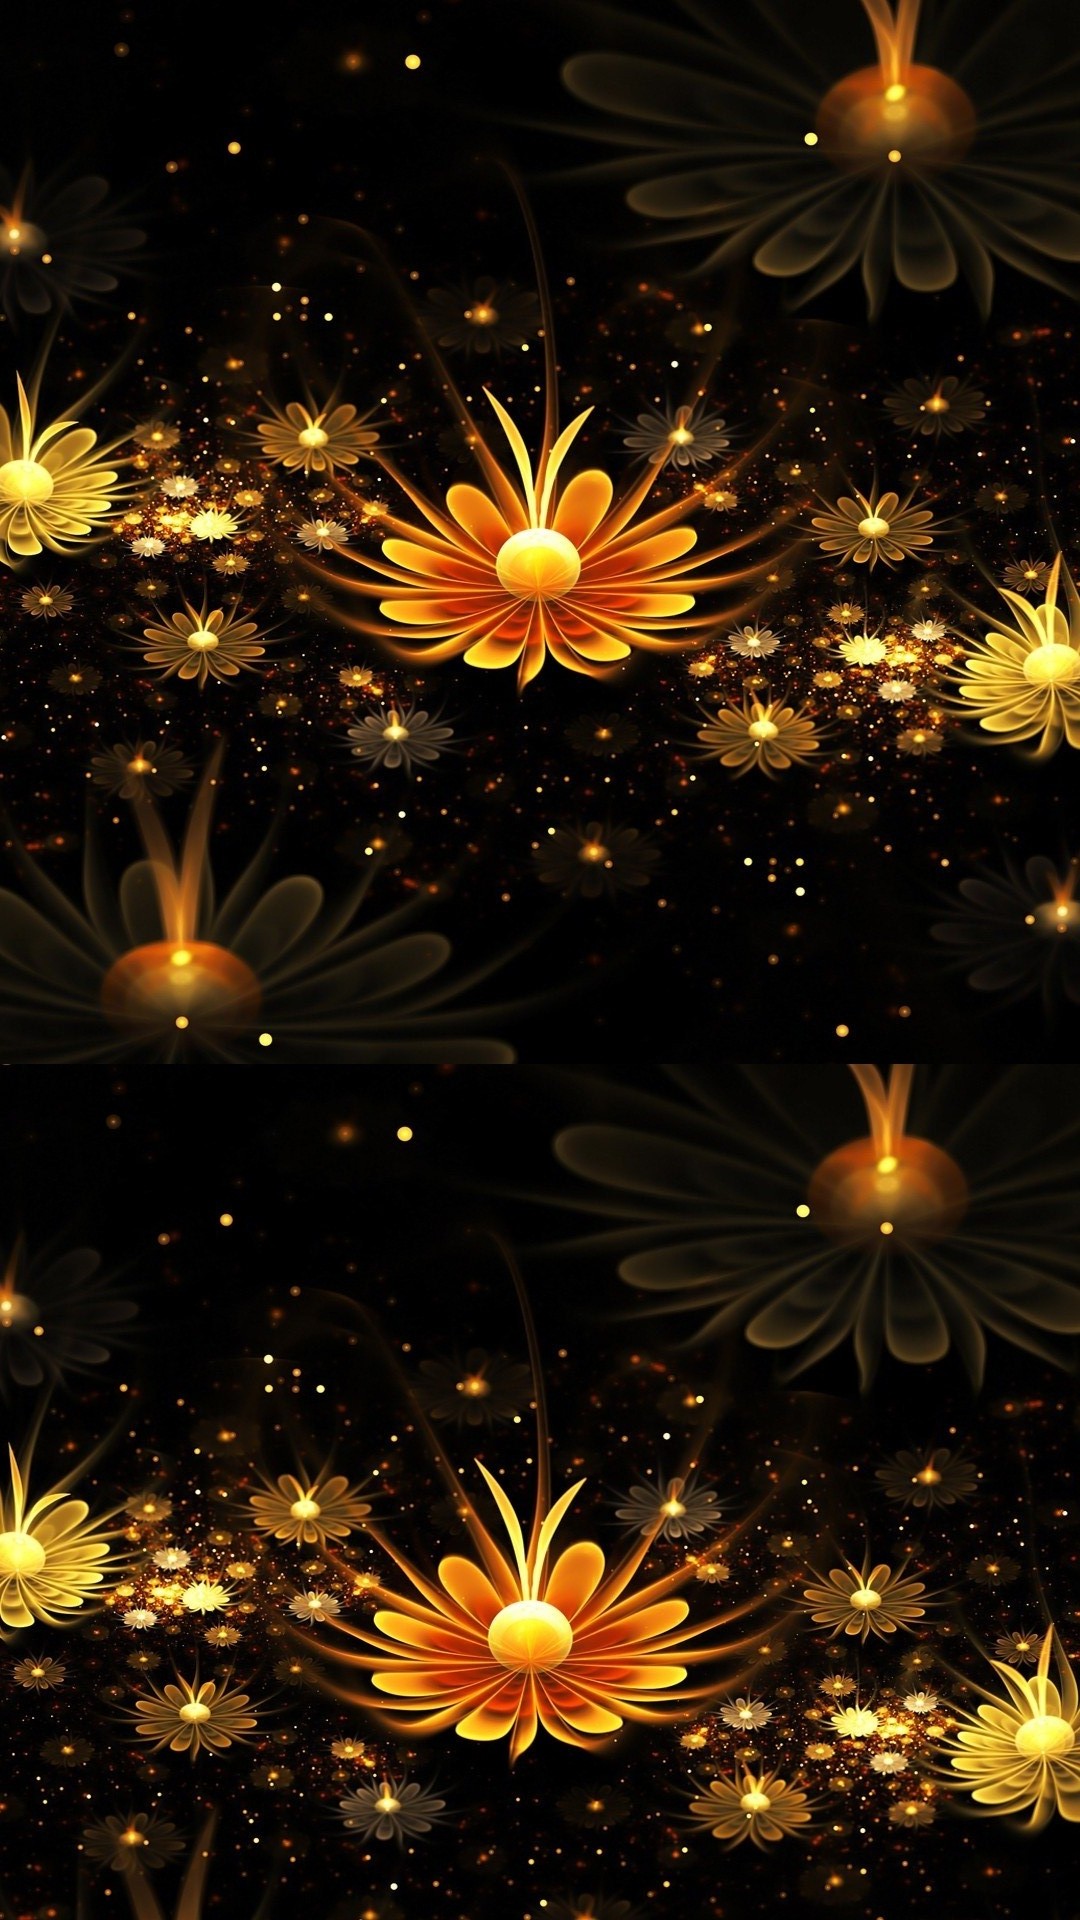 3D Flower Wallpaper For Mobile Android Resolution 1080x1920